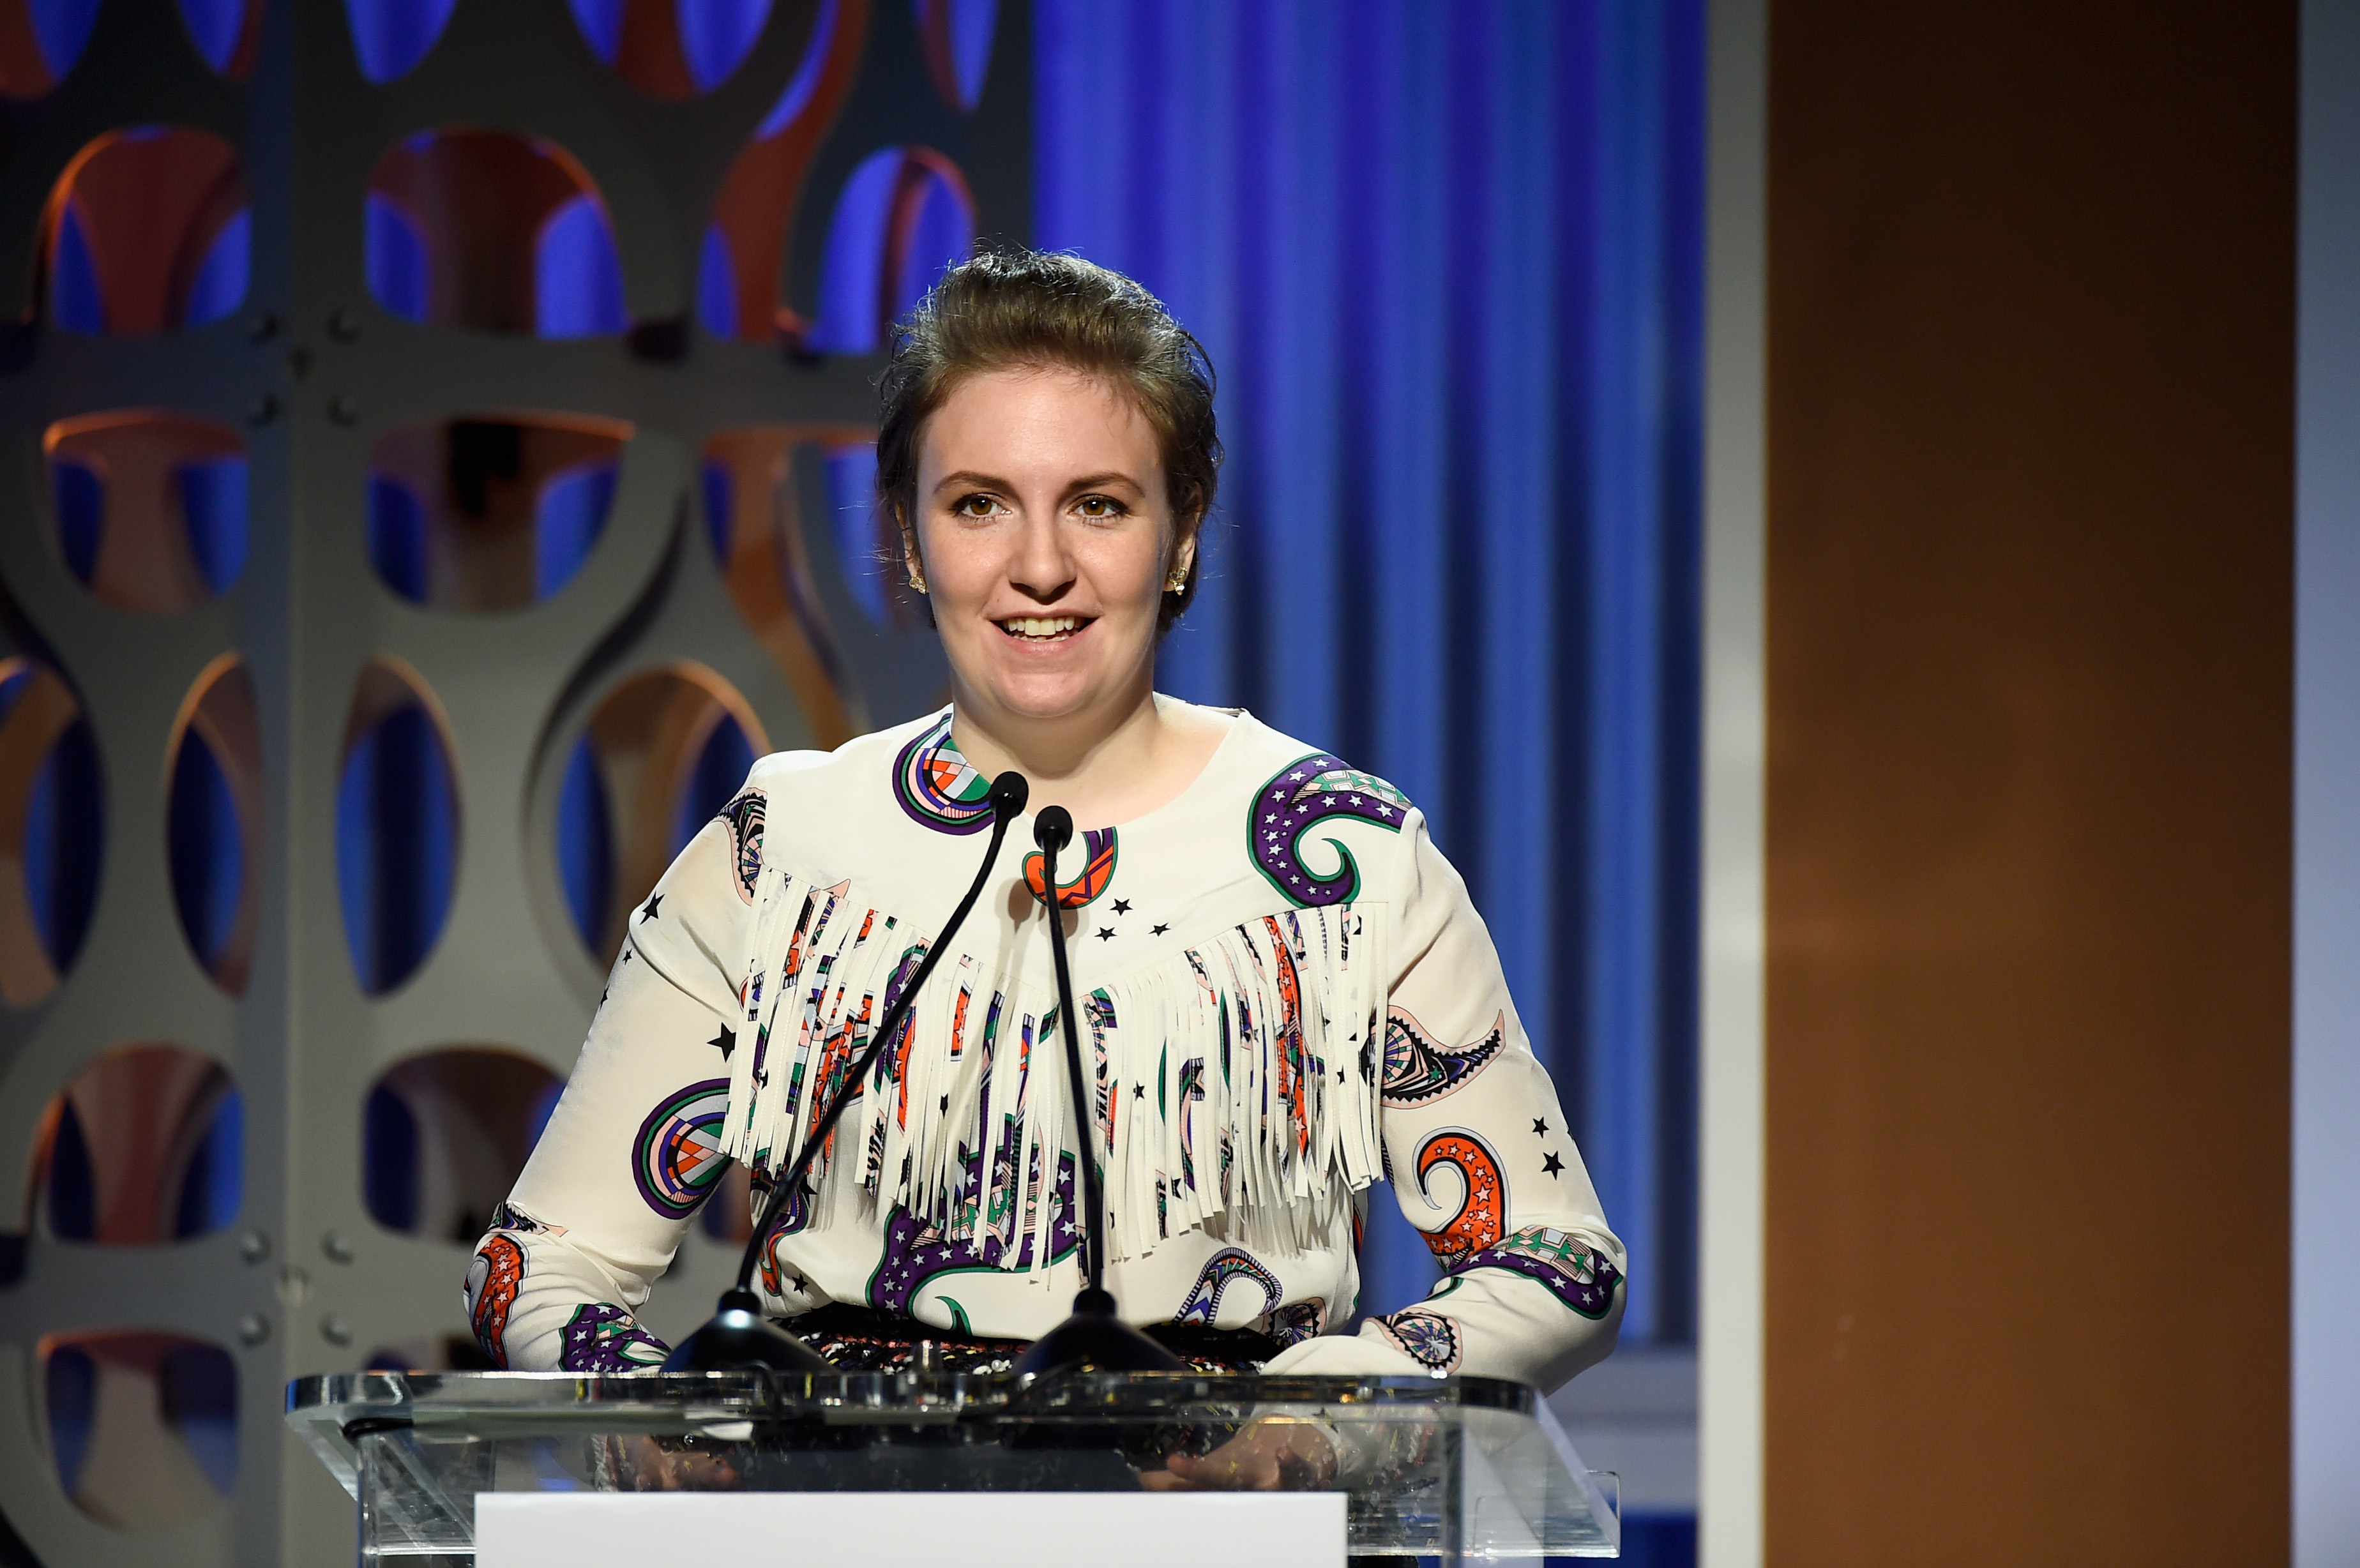 Honoree Lena Dunham delivers remarks during the annual Women in Entertainment breakfast that The Hollywood Reporter hosts in Los Angeles. (Frazer Harrison—Getty Images)